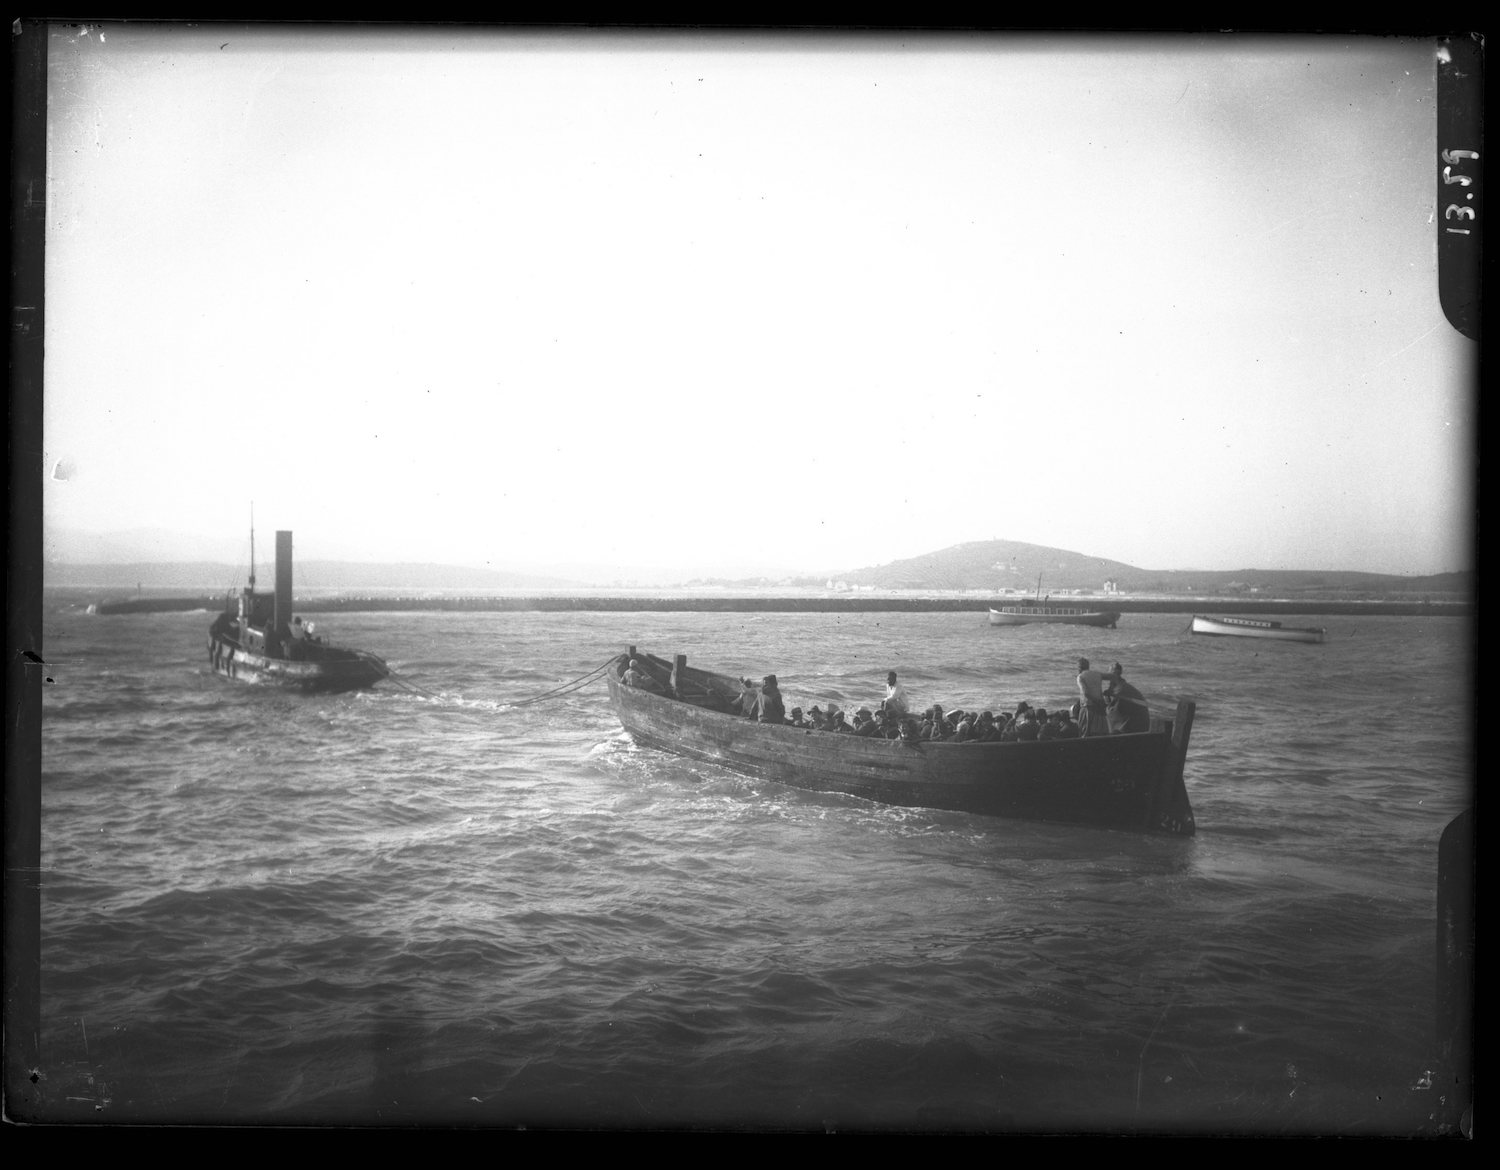 Boats on the water by the Tangier port.